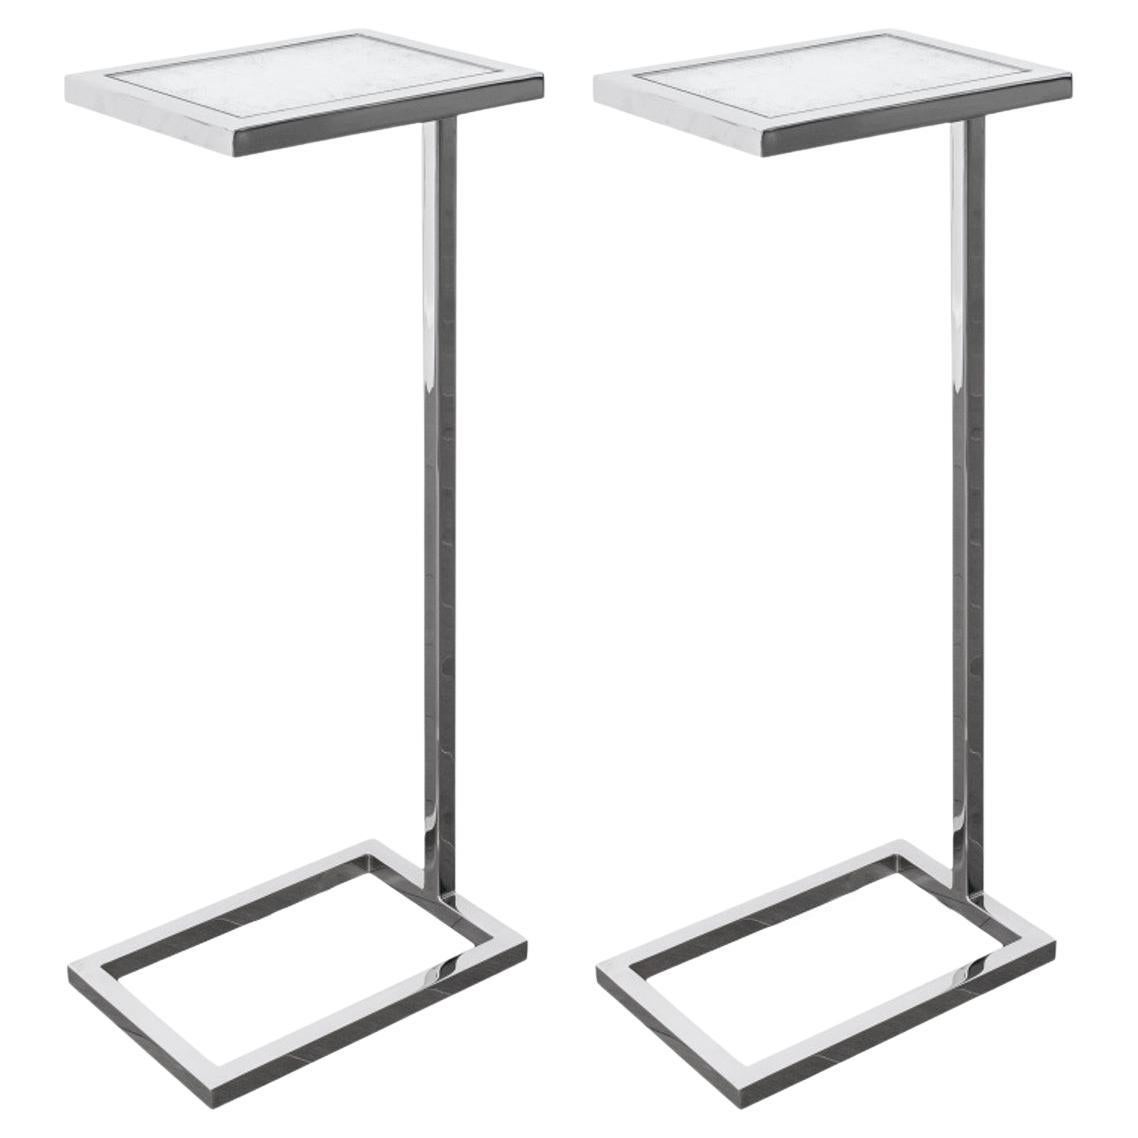 Eileen Gray Style Modernist Chrome Mirror Tables, Pair For Sale